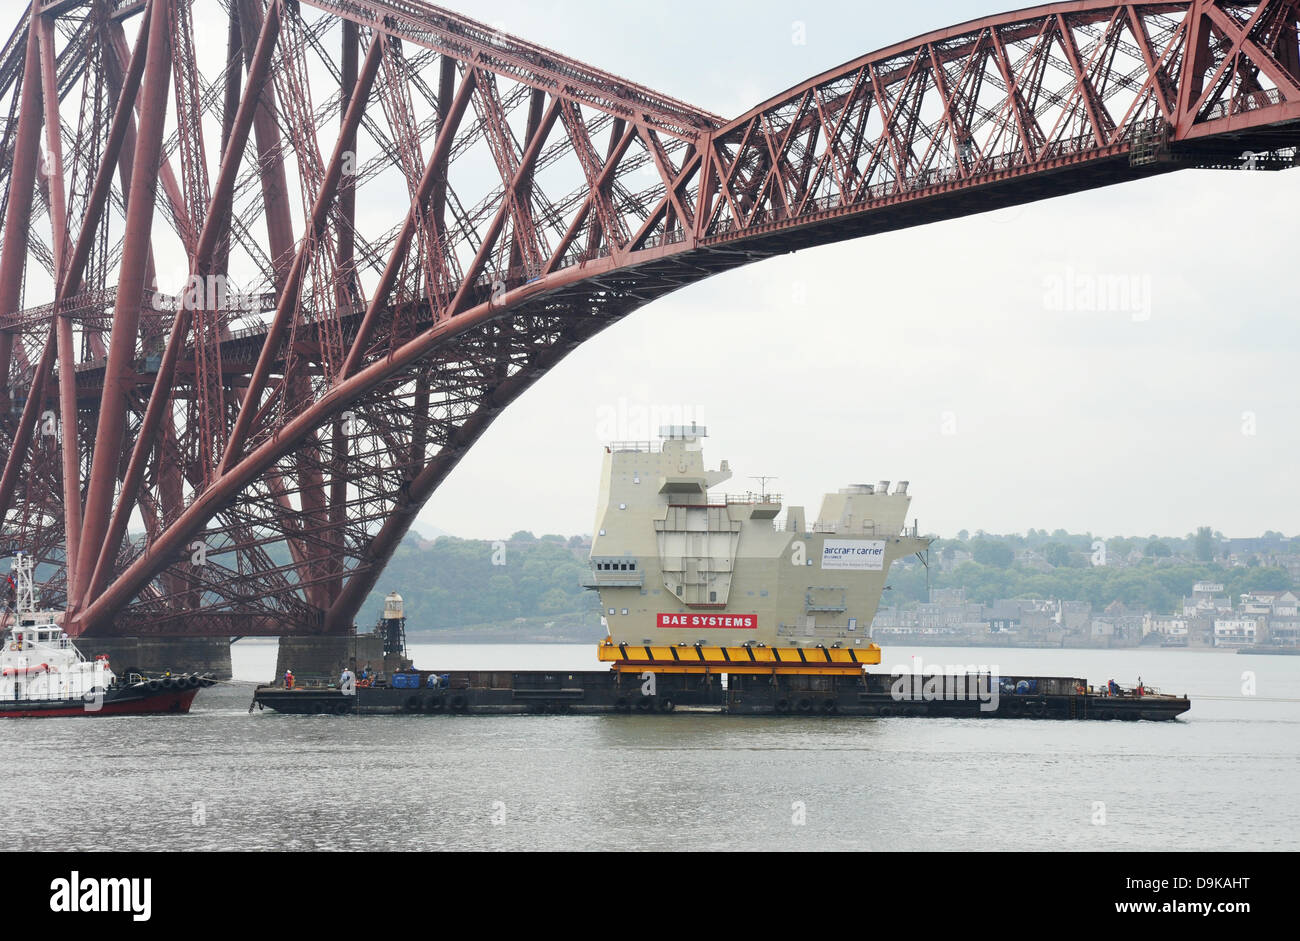 The Forth, near Edinburgh, UK. 21st June, 2013. Final piece of new aircraft carrier entering under the Forth Bridge near Rosyth. The section of aircraft carrier was built in Scotstoun and was being taken to the Rosyth dockyard for completion. Stock Photo